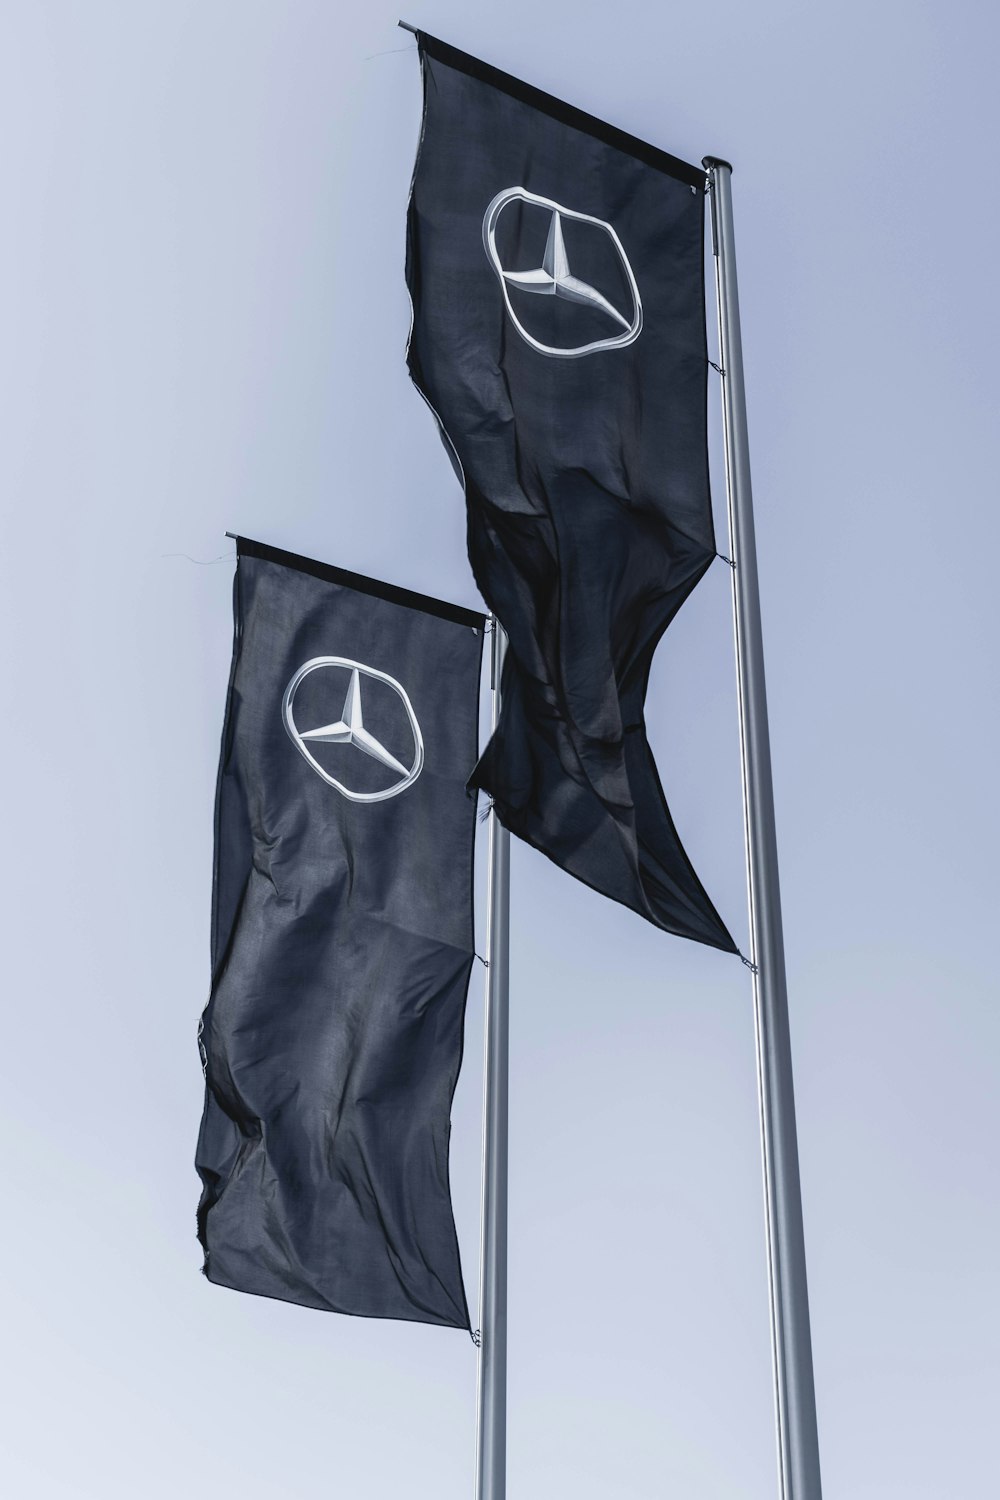 Mercedes-Benz and Scion banners waving